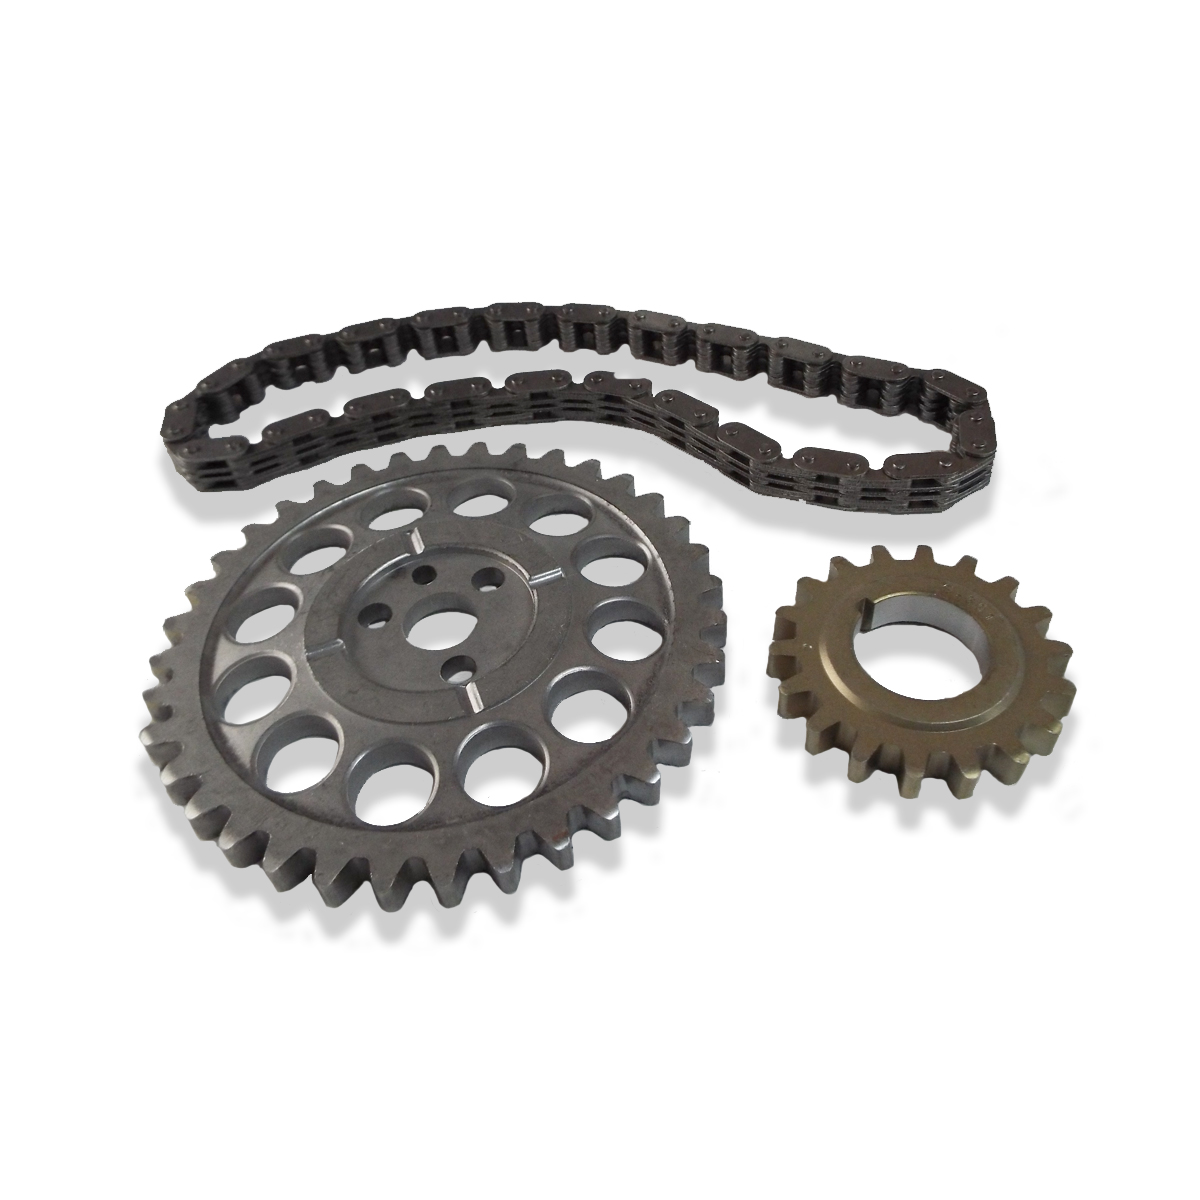 1955-1972 Timing Chain and Gear Set V-8 Chevrolet Pickup Truck